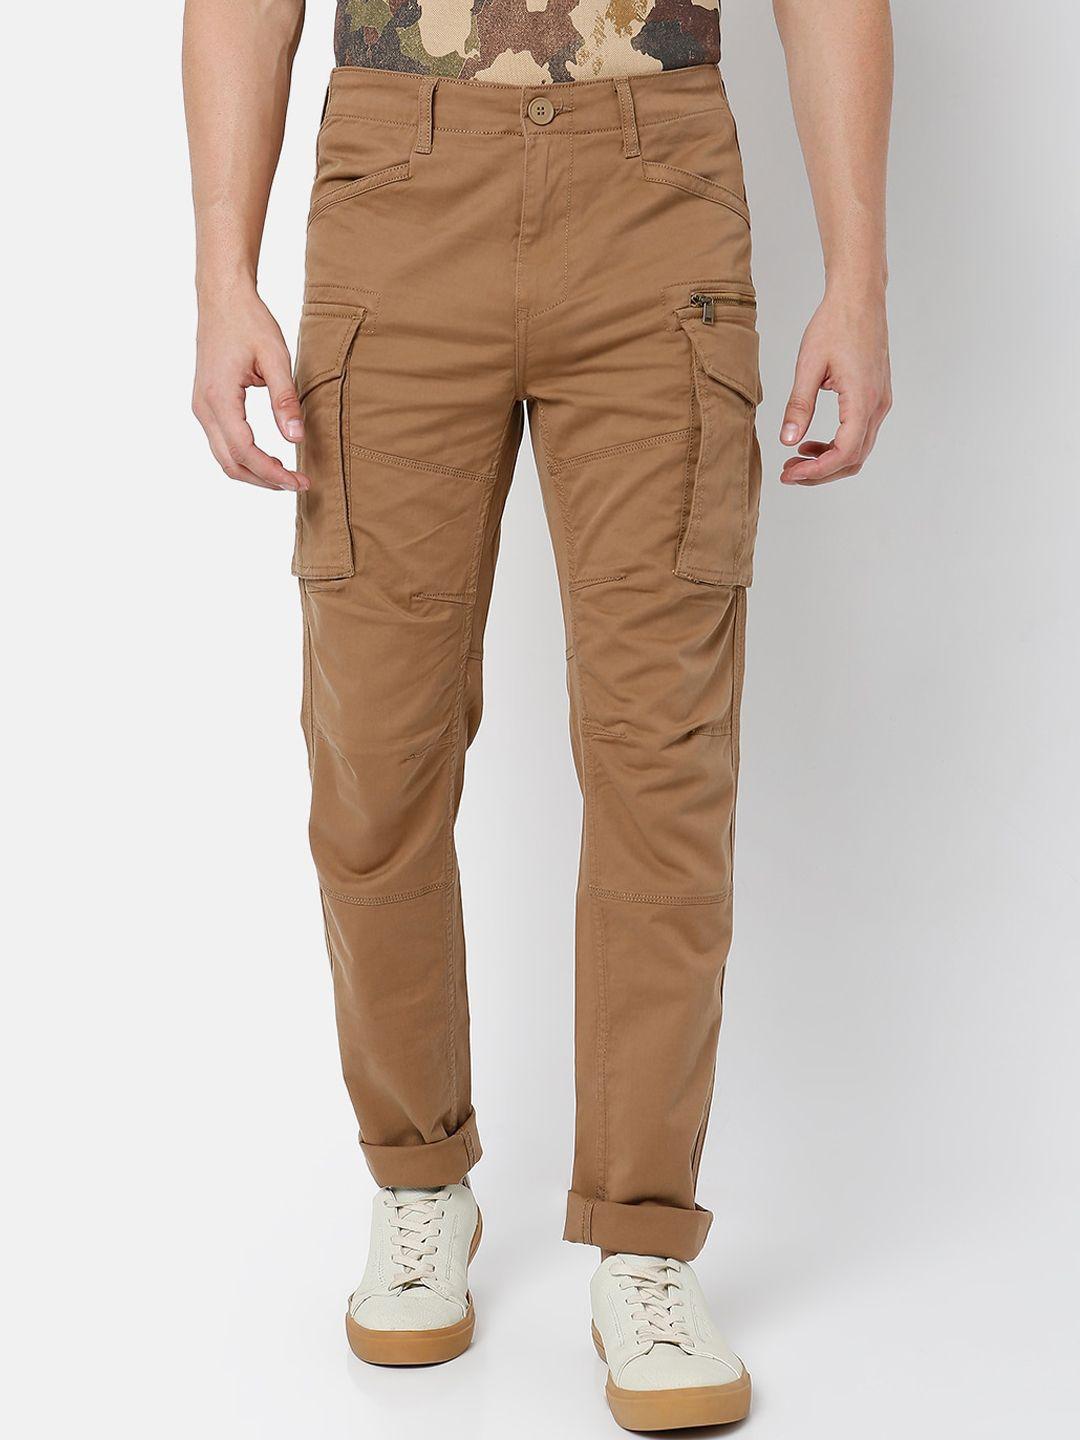 mufti men brown relaxed loose fit cargos trousers